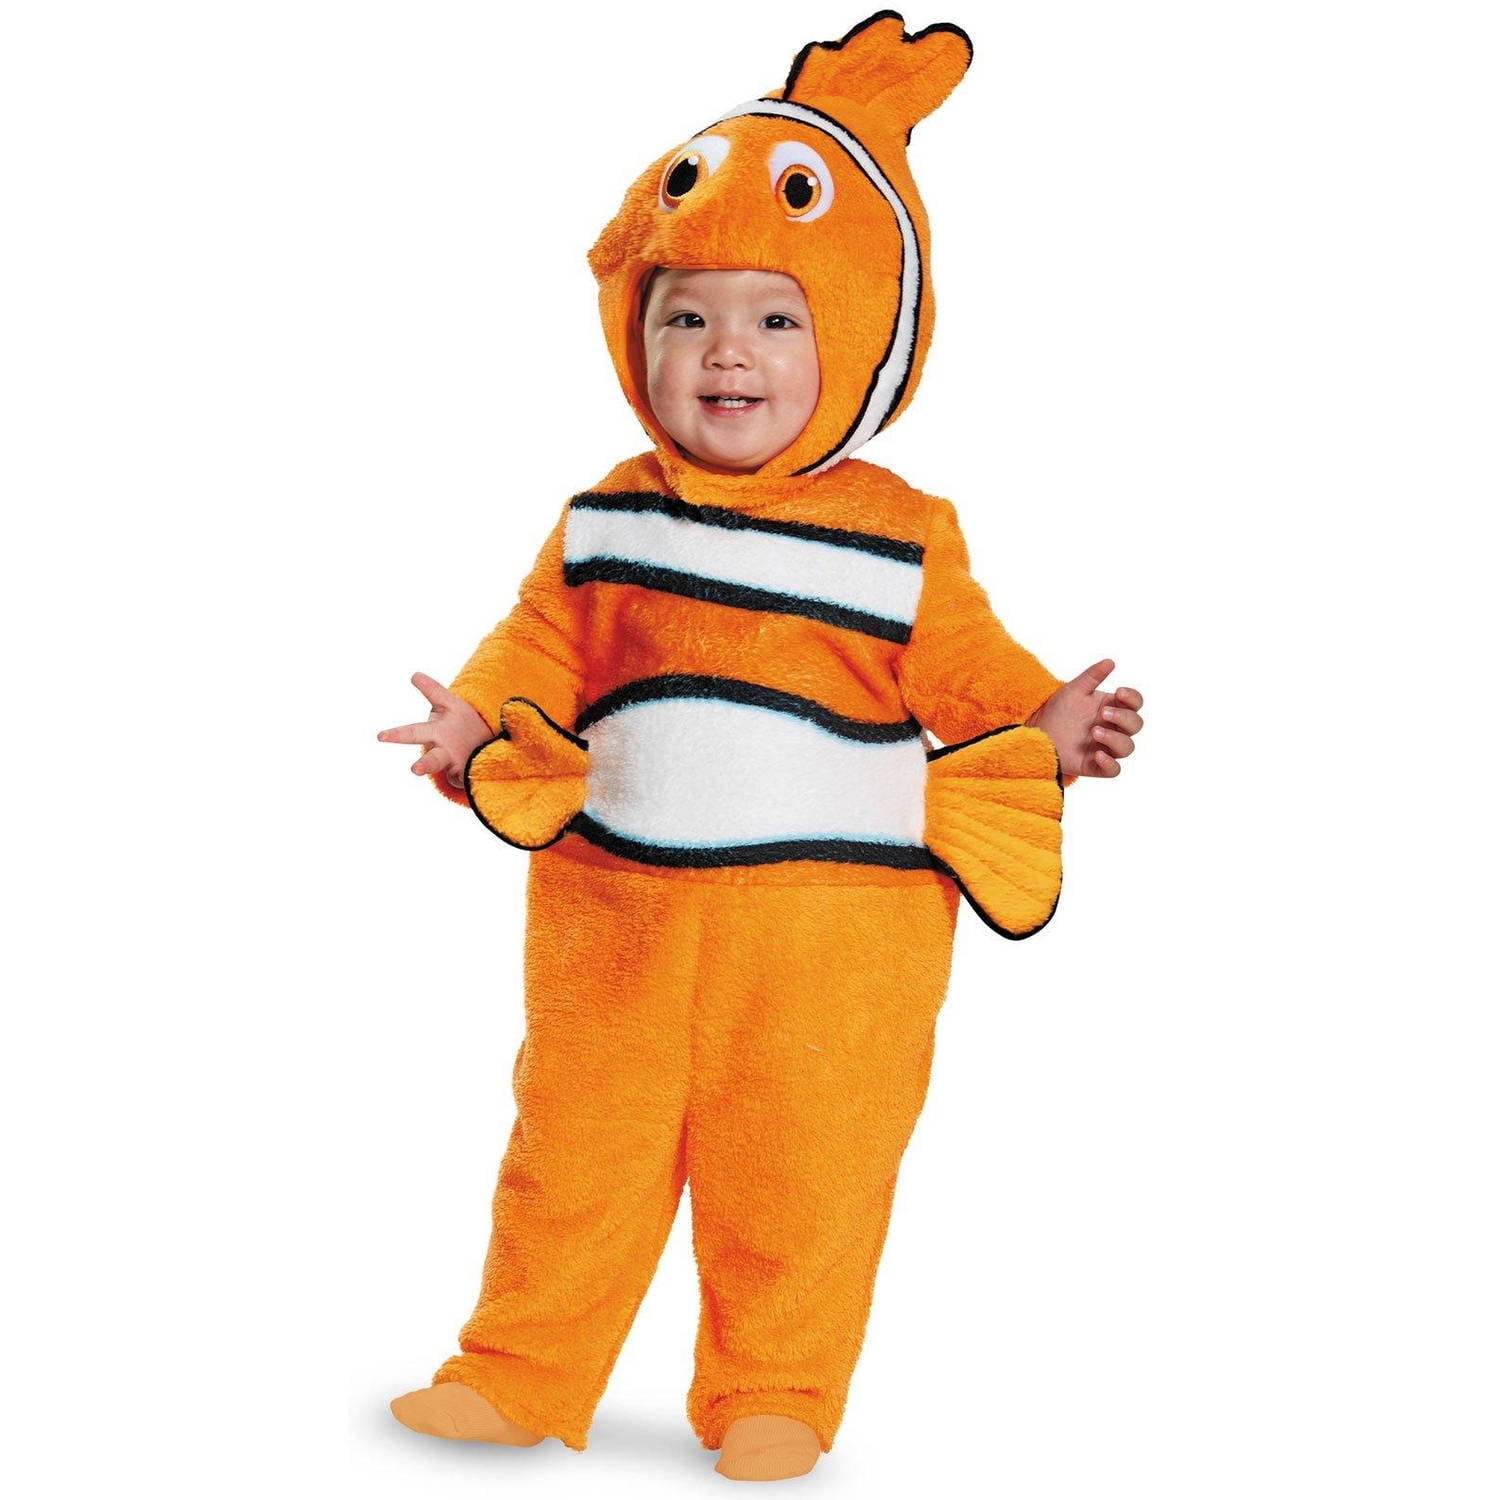 finding nemo baby clothes